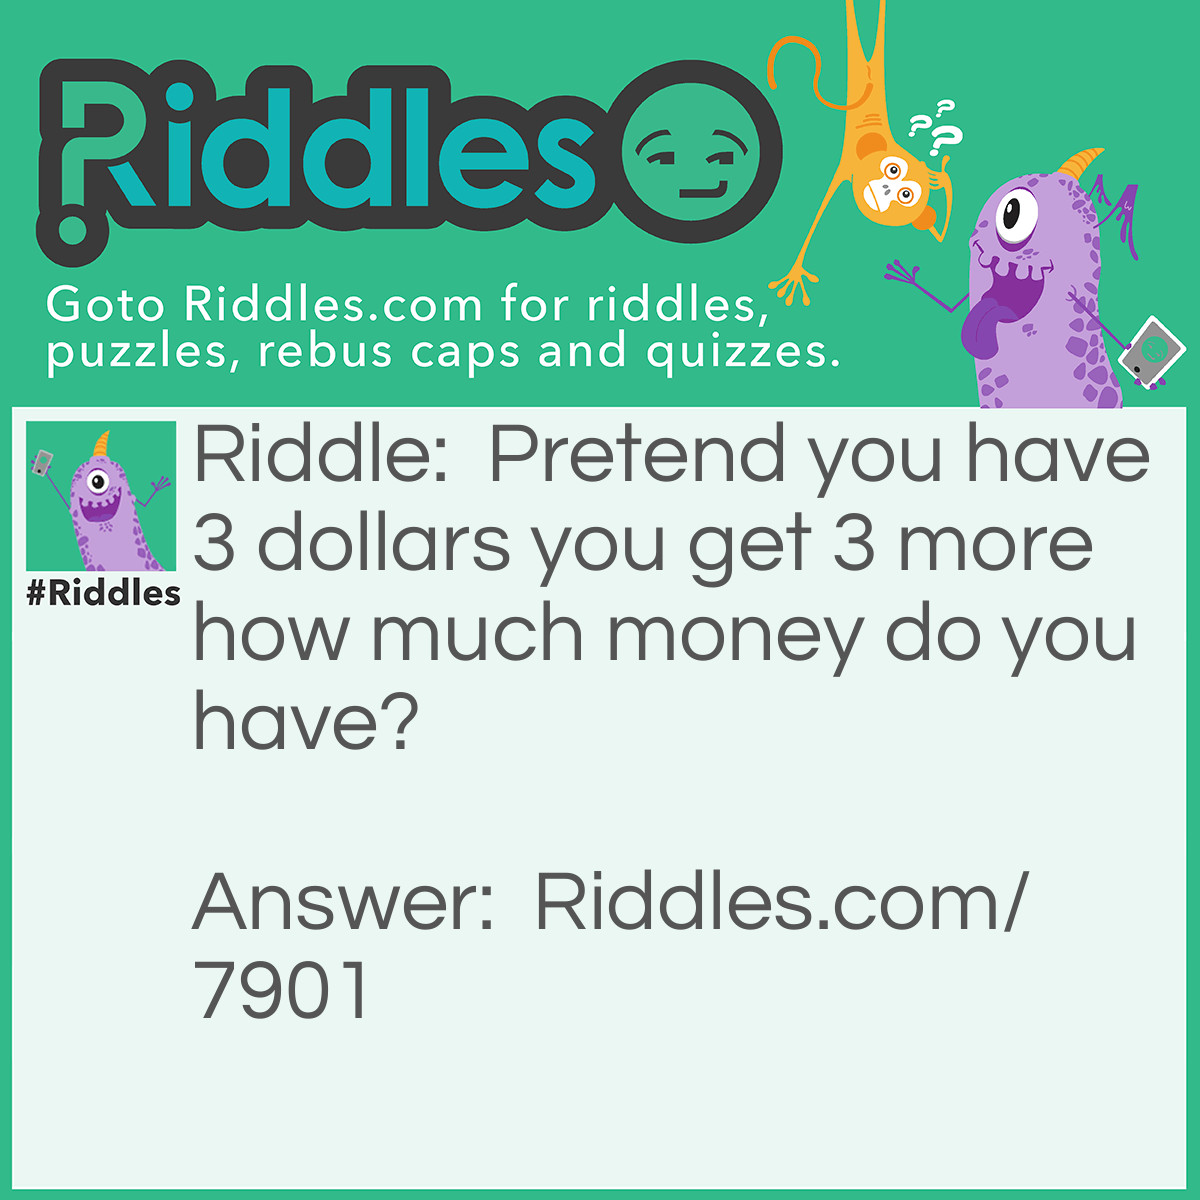 Riddle: Pretend you have 3 dollars you get 3 more how much money do you have? Answer: 0 your pretending!